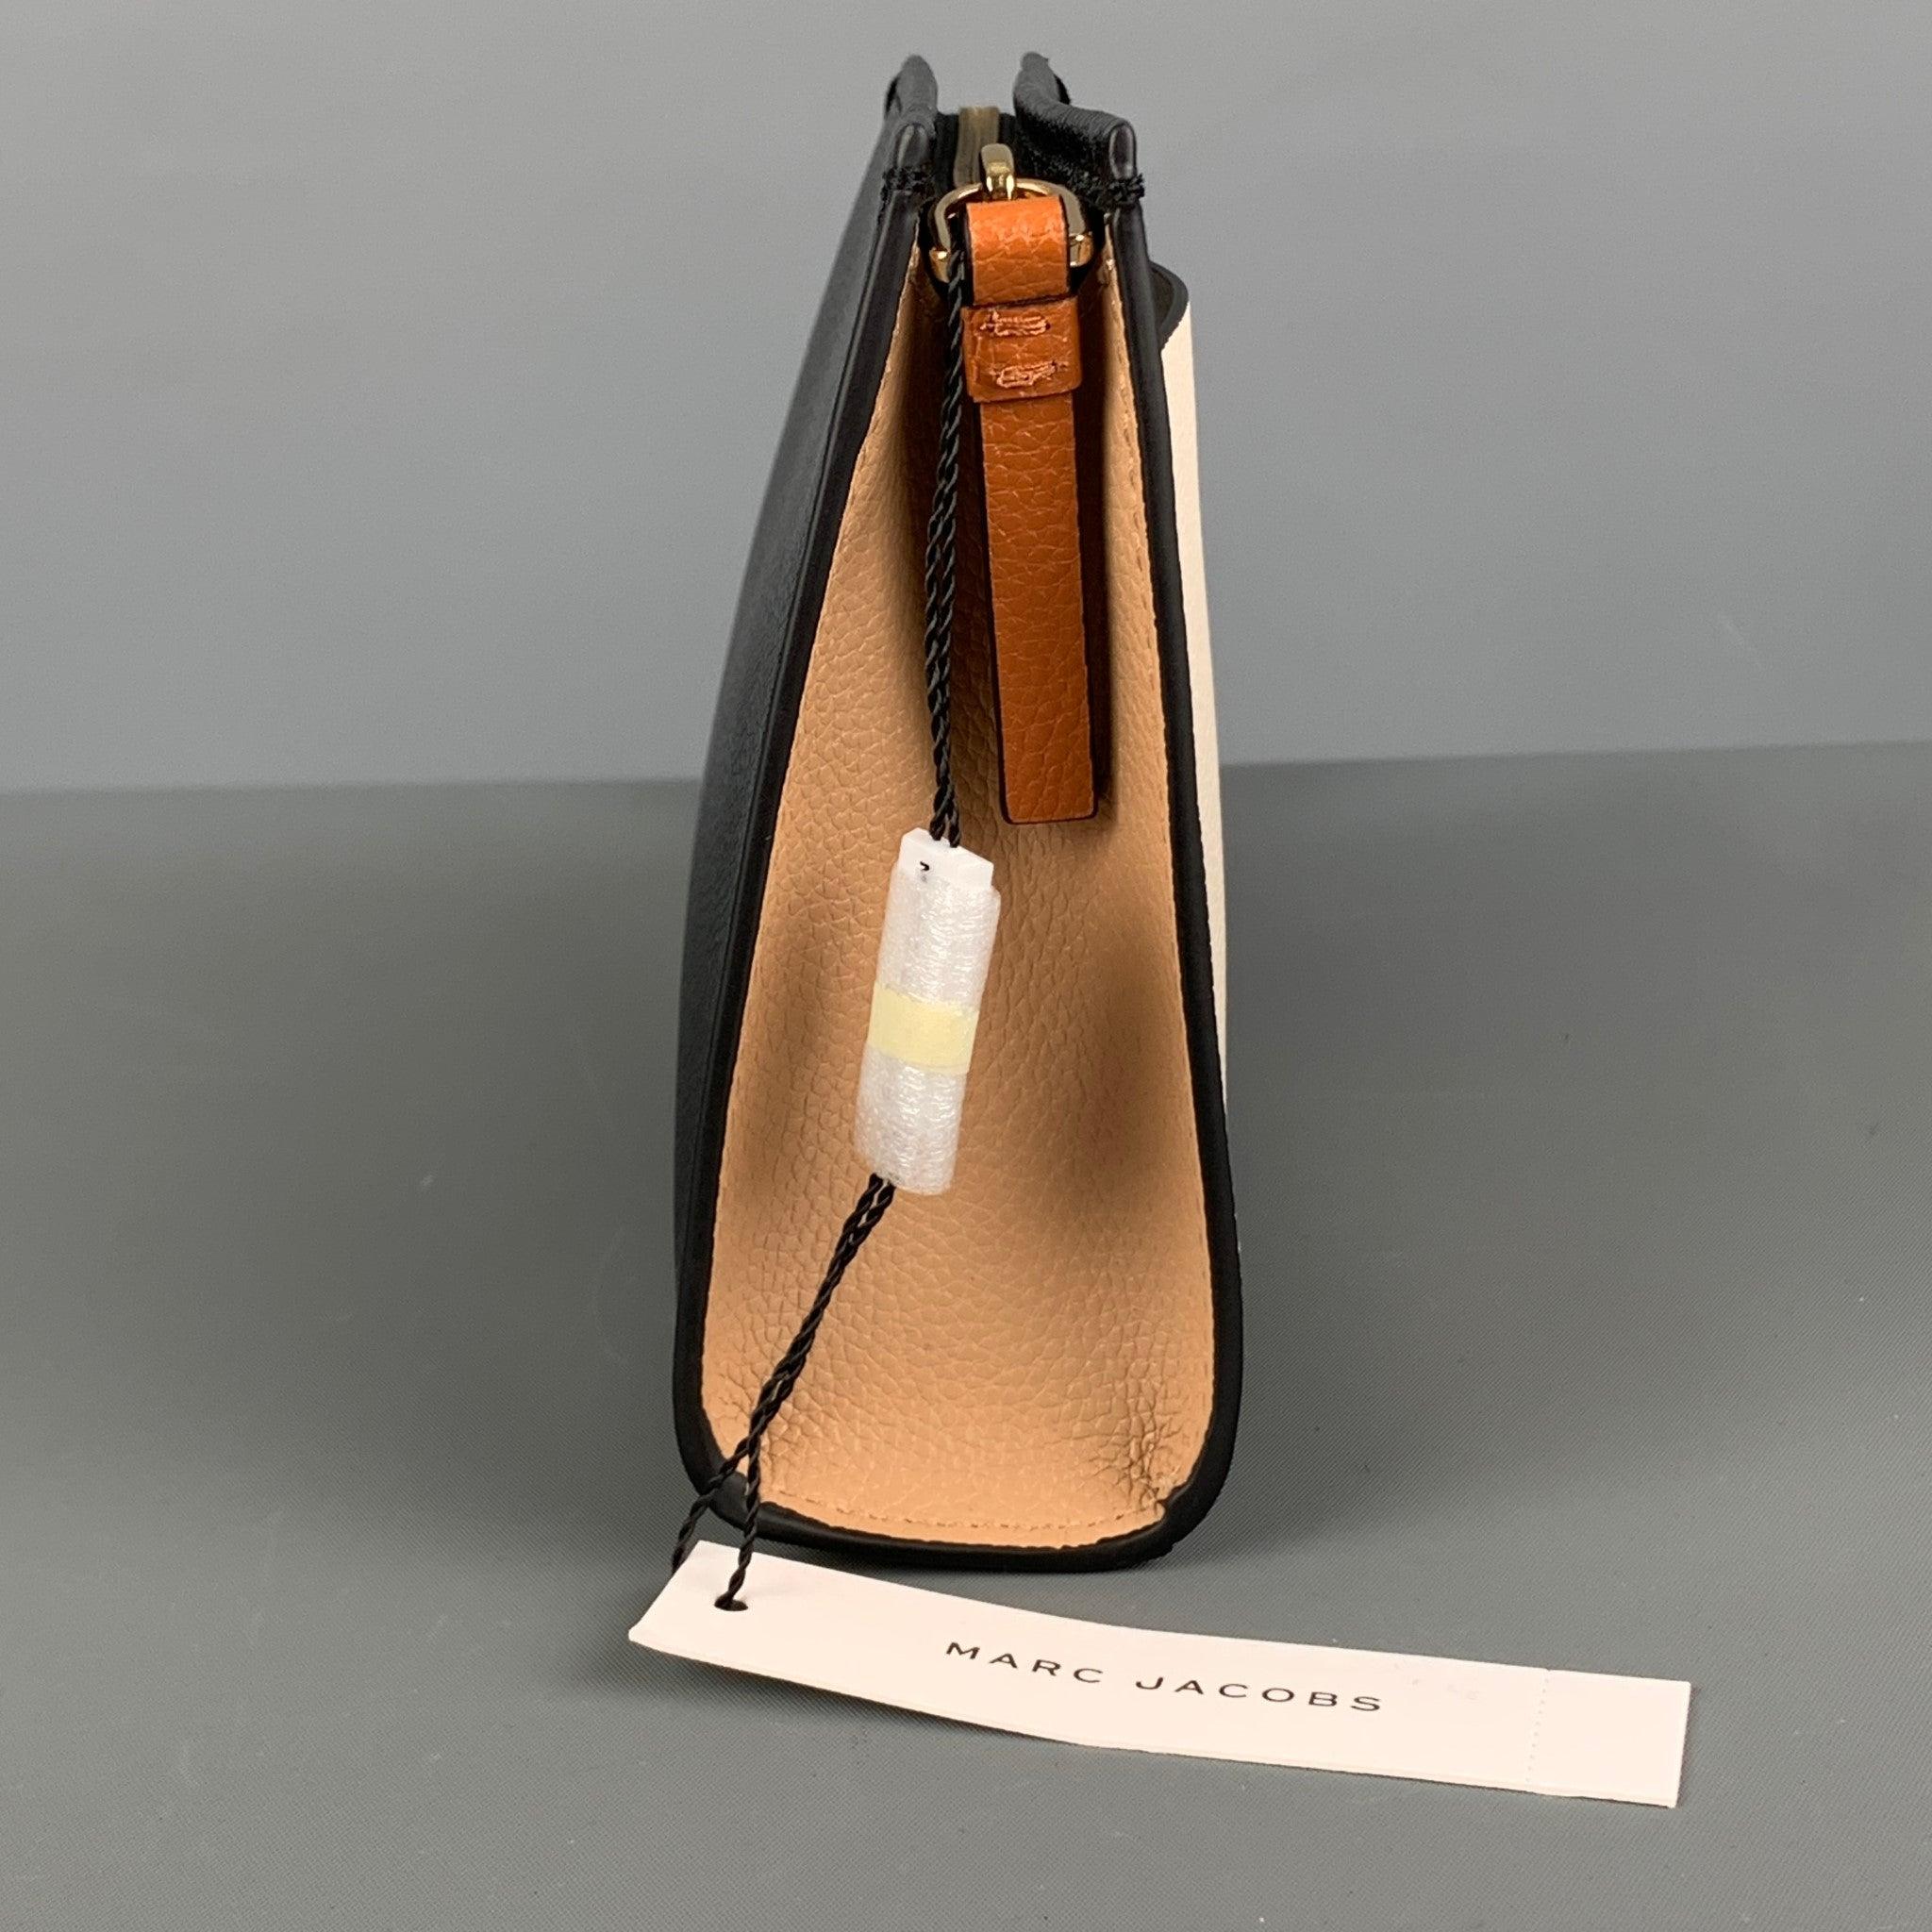 MARC JACOBS Black Tan Color Block Leather Clutch In Excellent Condition For Sale In San Francisco, CA